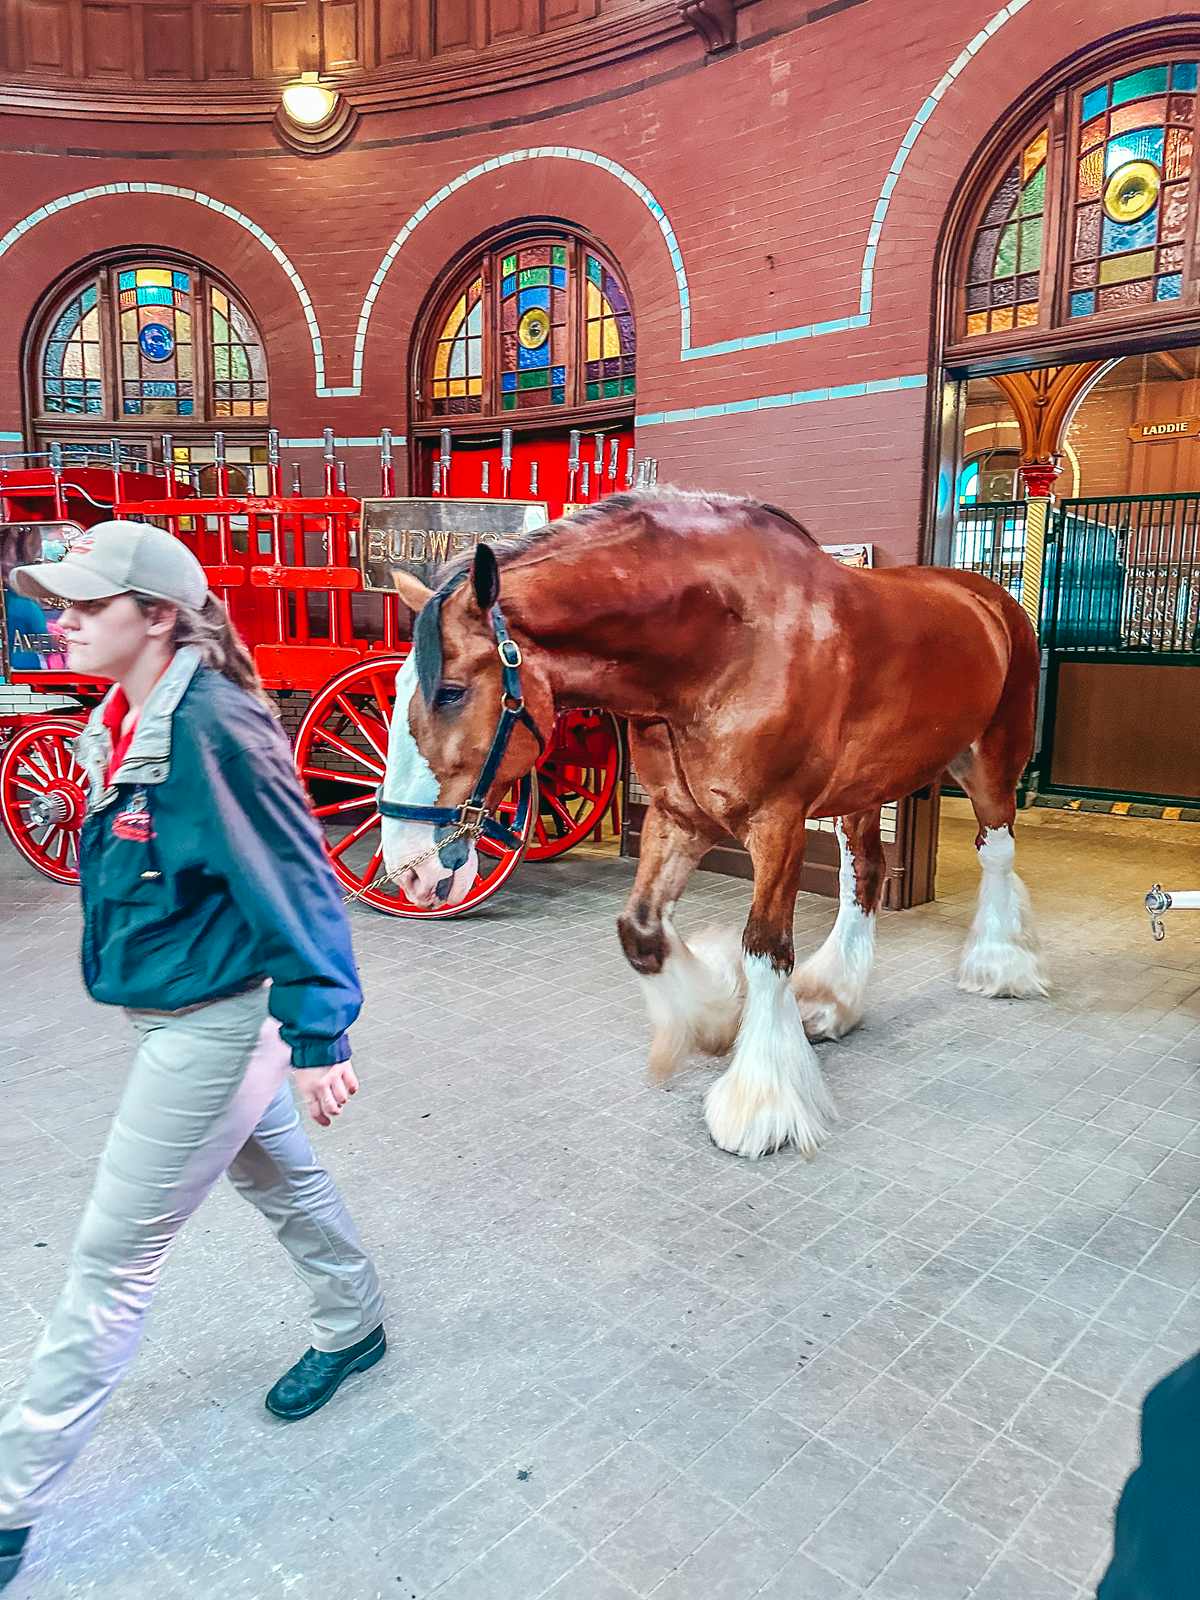 see a horse in Anheuser-Busch Brewery when you spend a Weekend in St. Louis